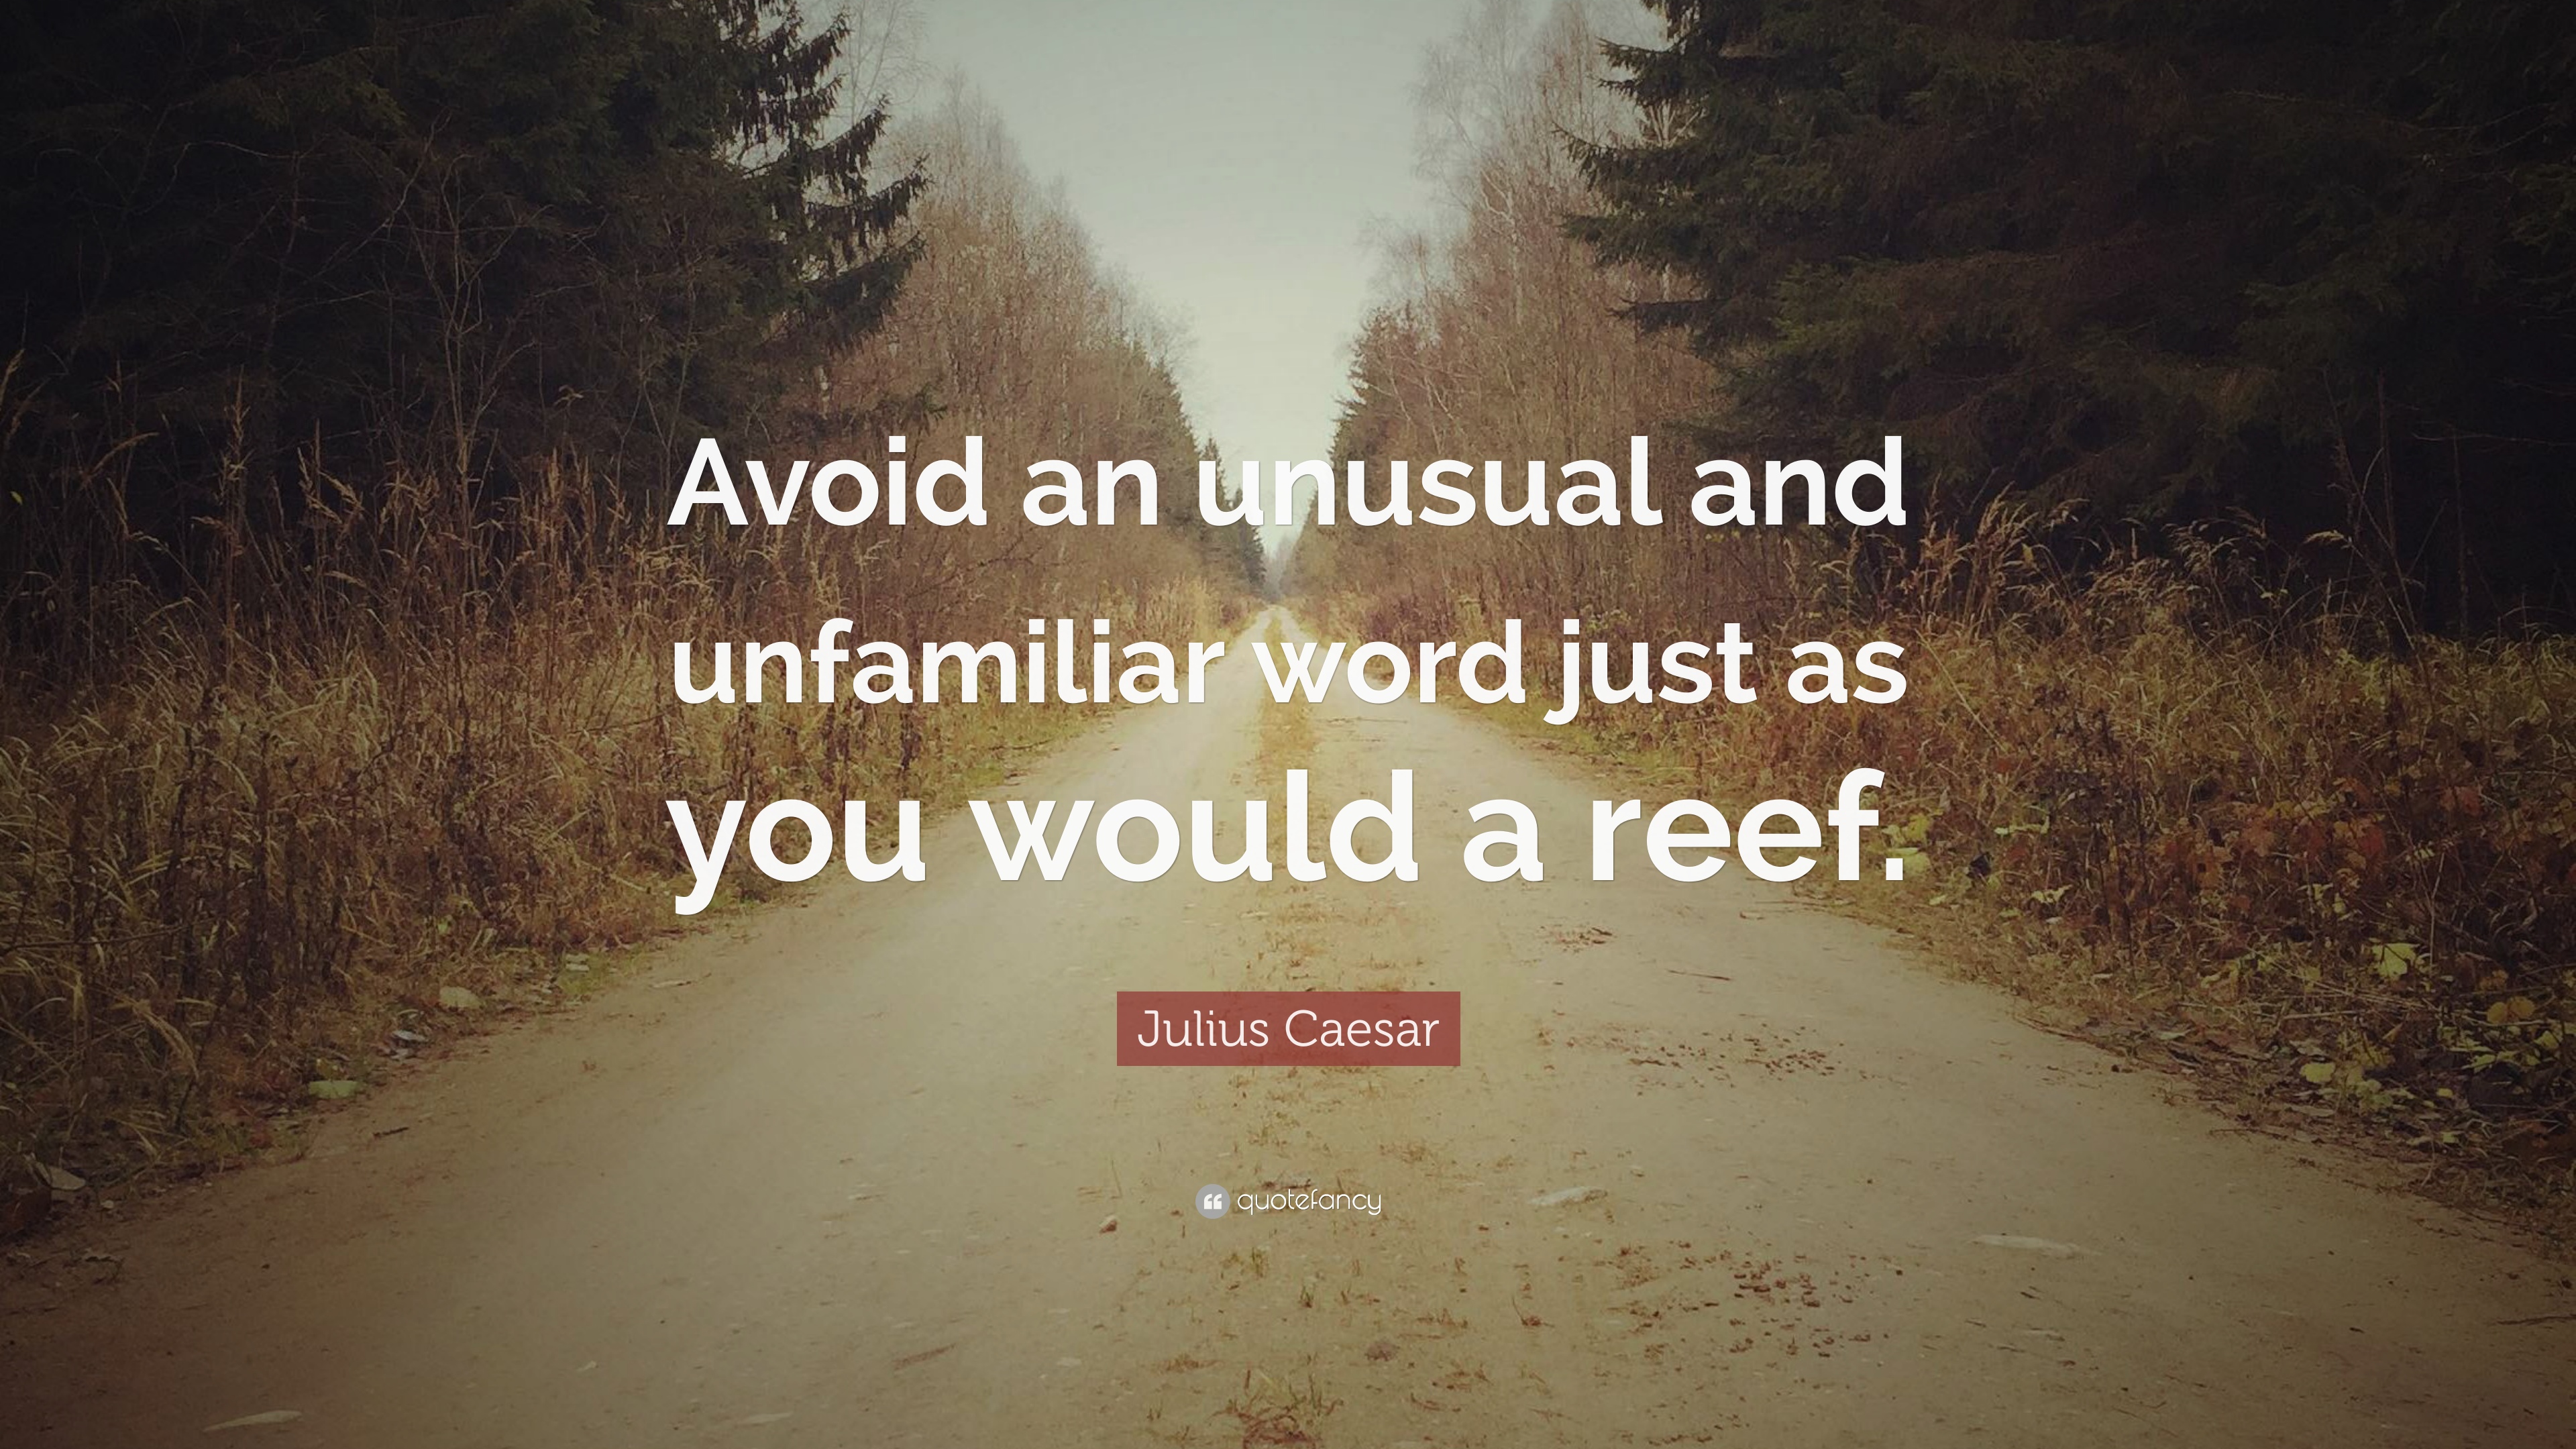 Julius Caesar Quote: “Avoid an unusual and unfamiliar word just as